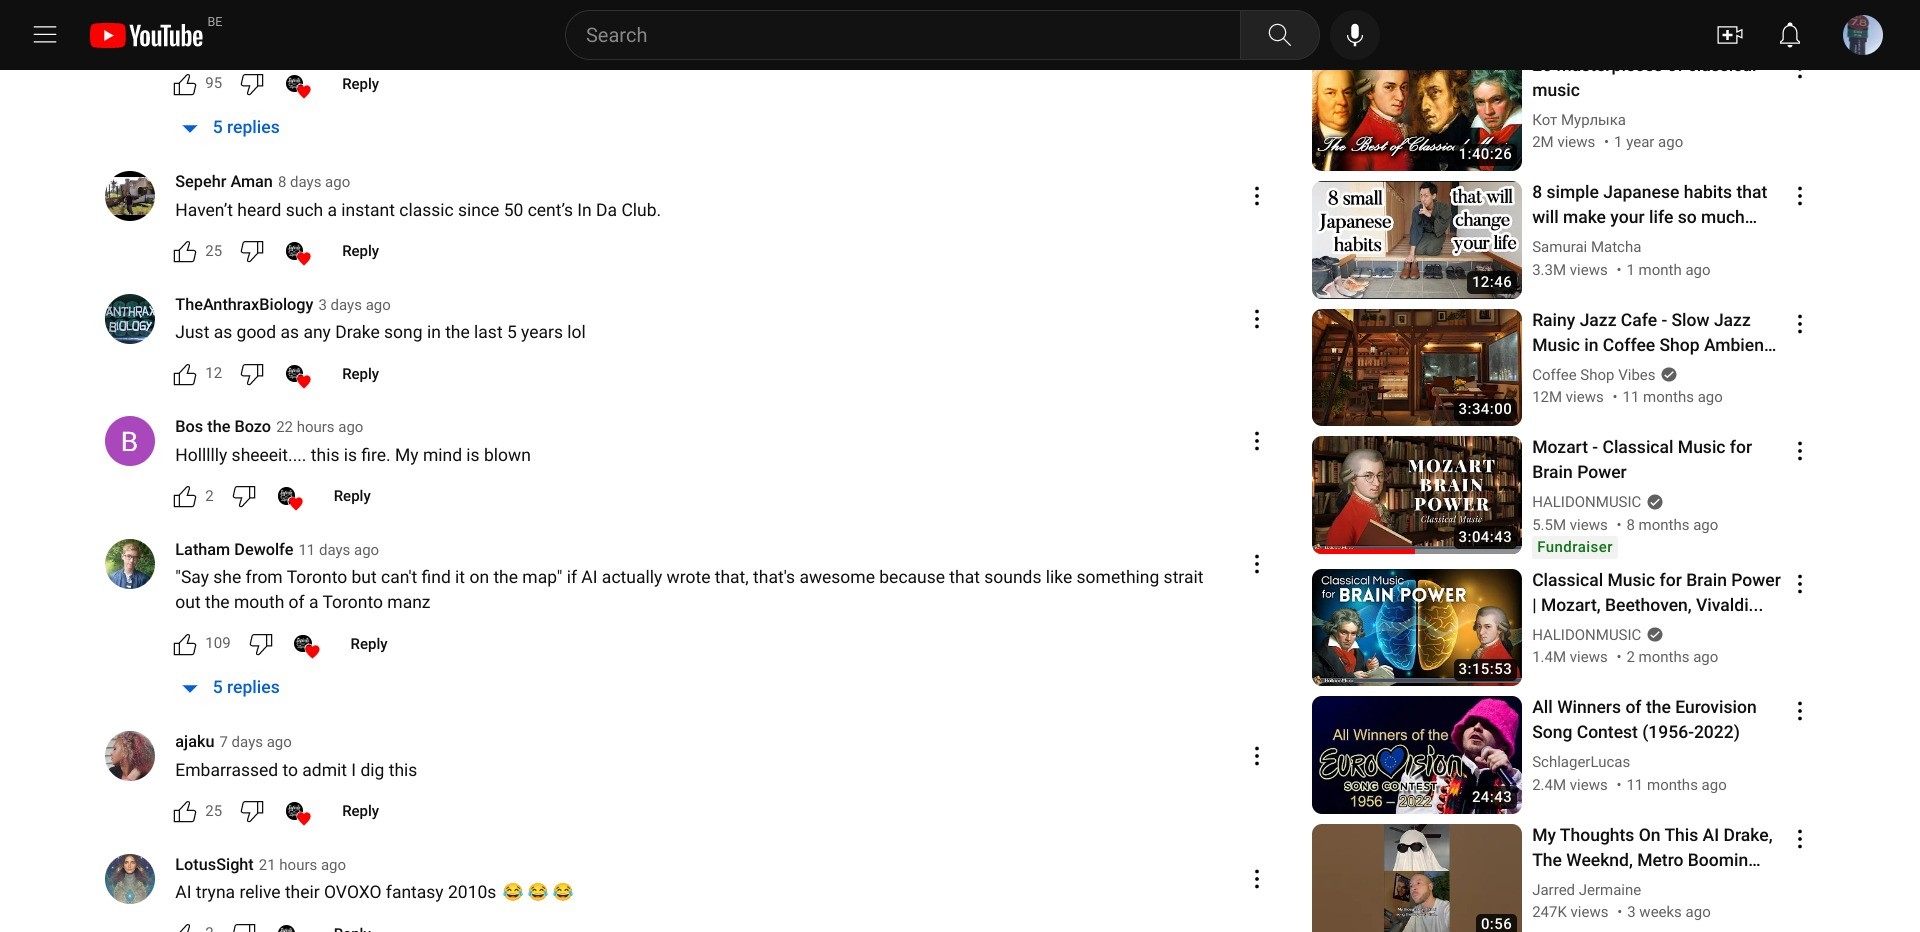 Screenshot of https://www.youtube.com/watch?v=81Kafnm0eKQ displaying the comments section